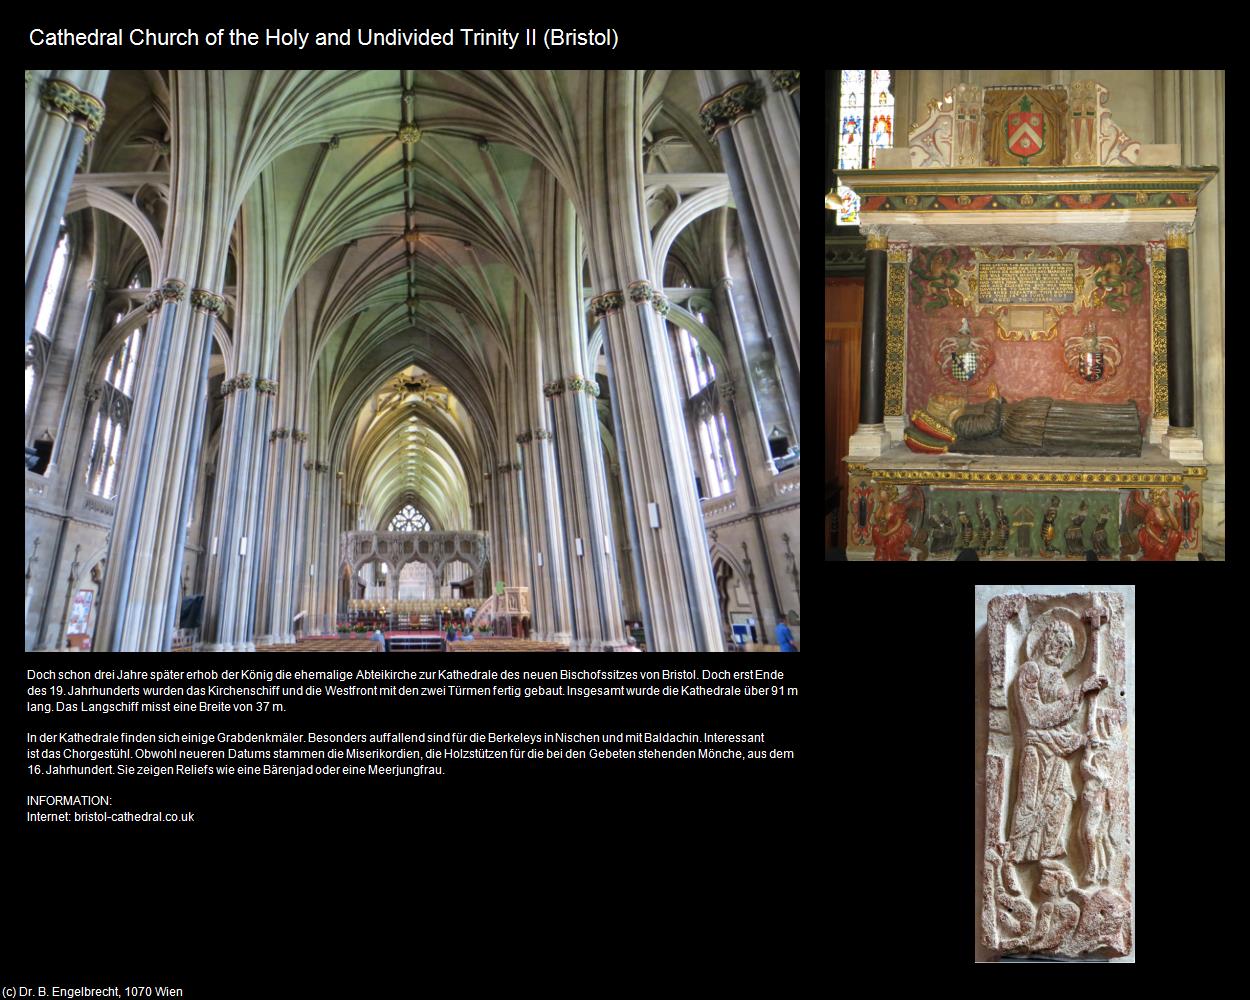 Cathedral Church of the Holy and Undivided Trinity II (Bristol, England) in Kulturatlas-ENGLAND und WALES